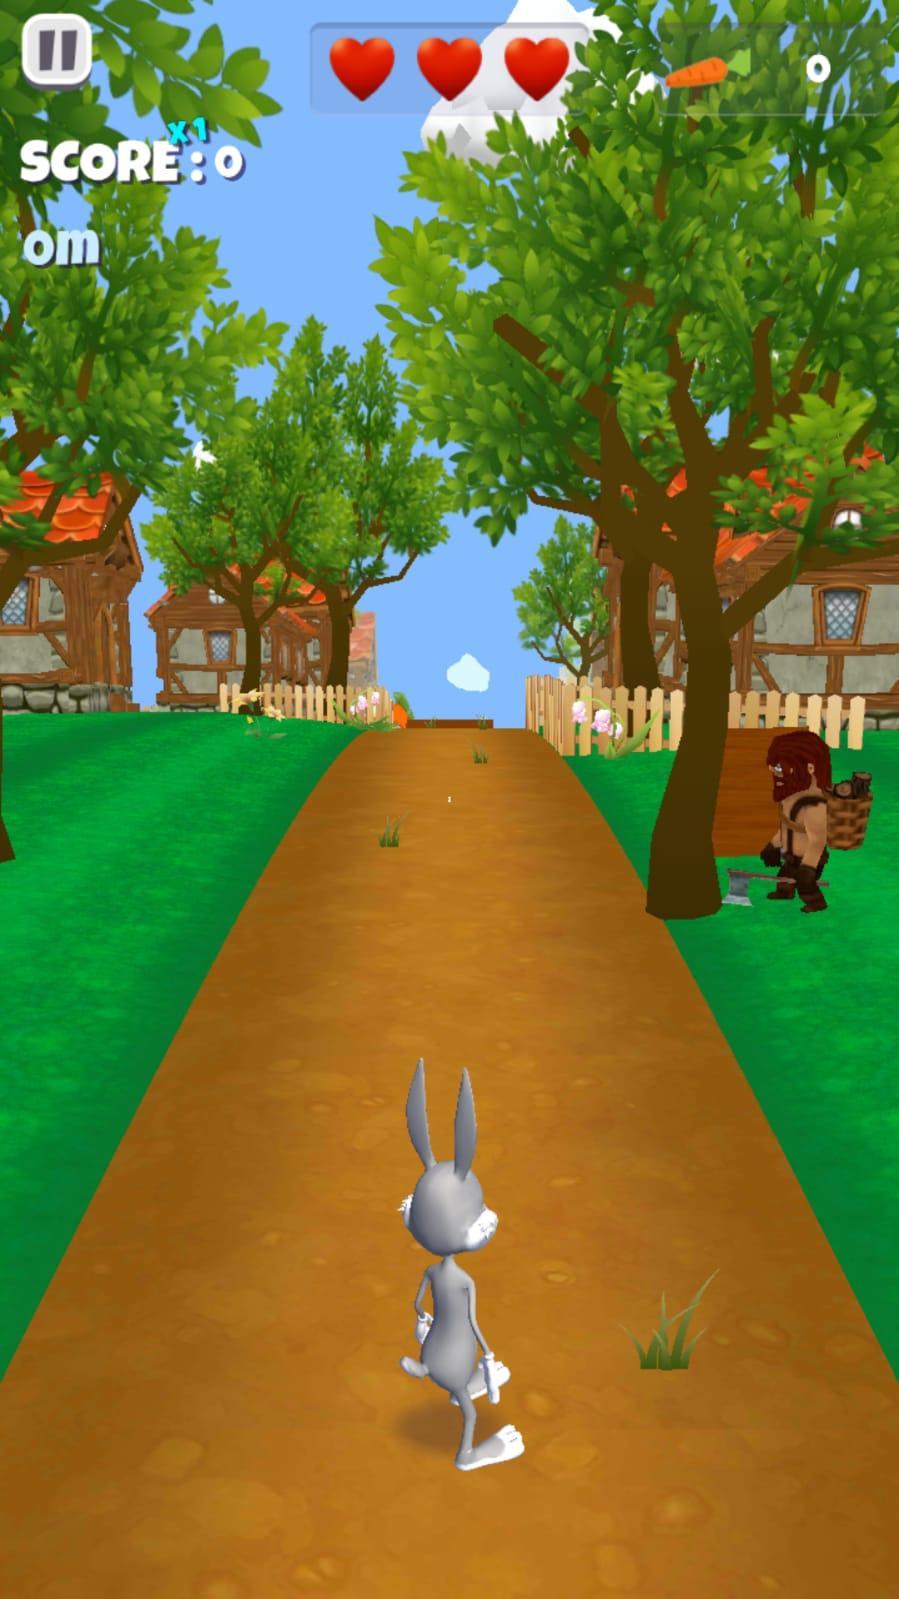 Bunny Boo for Android - APK Download